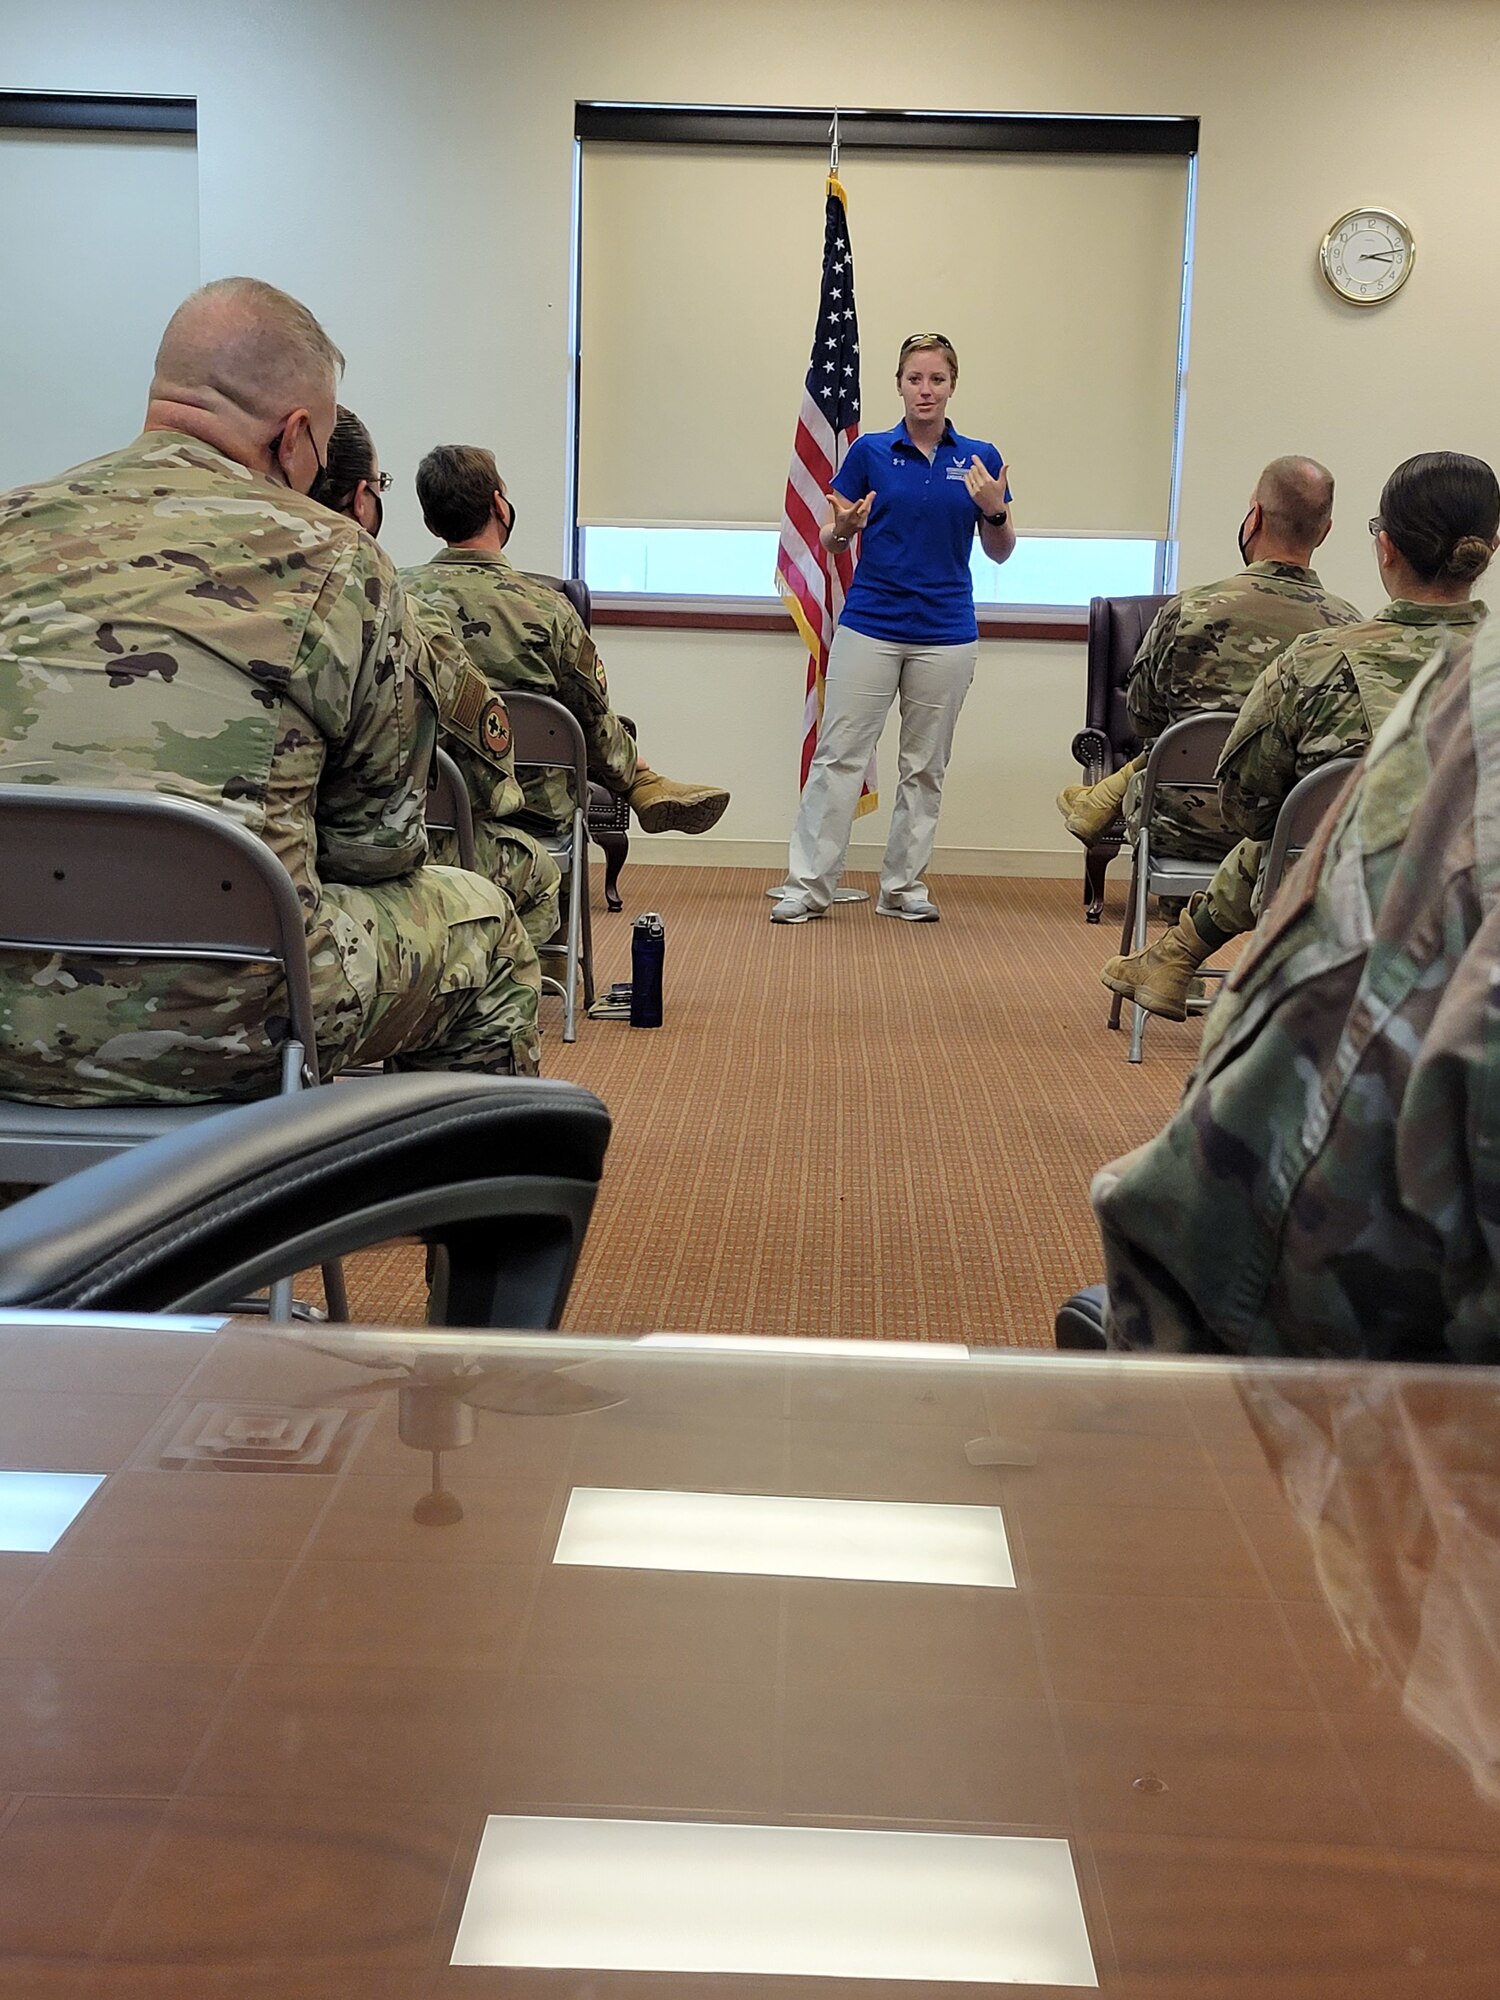 Staff Sgt. Jessica Thelen, AFW2 Ambassador, shares her story of trauma and resiliency with the 7th Bomb Wing Medical Group, Tuesday, June 8, 2021 at Dyess Air Force Base, Texas. The AFW2 Ambassador Program has been on the road this year conducting outreach briefings at multiple bases to inform the Air Force population about the AFW2 program, how it supports Airmen and how leaders can support their Airmen who have been injured, wounded or diagnosed with an illness. (Photo by Shannon Hall)